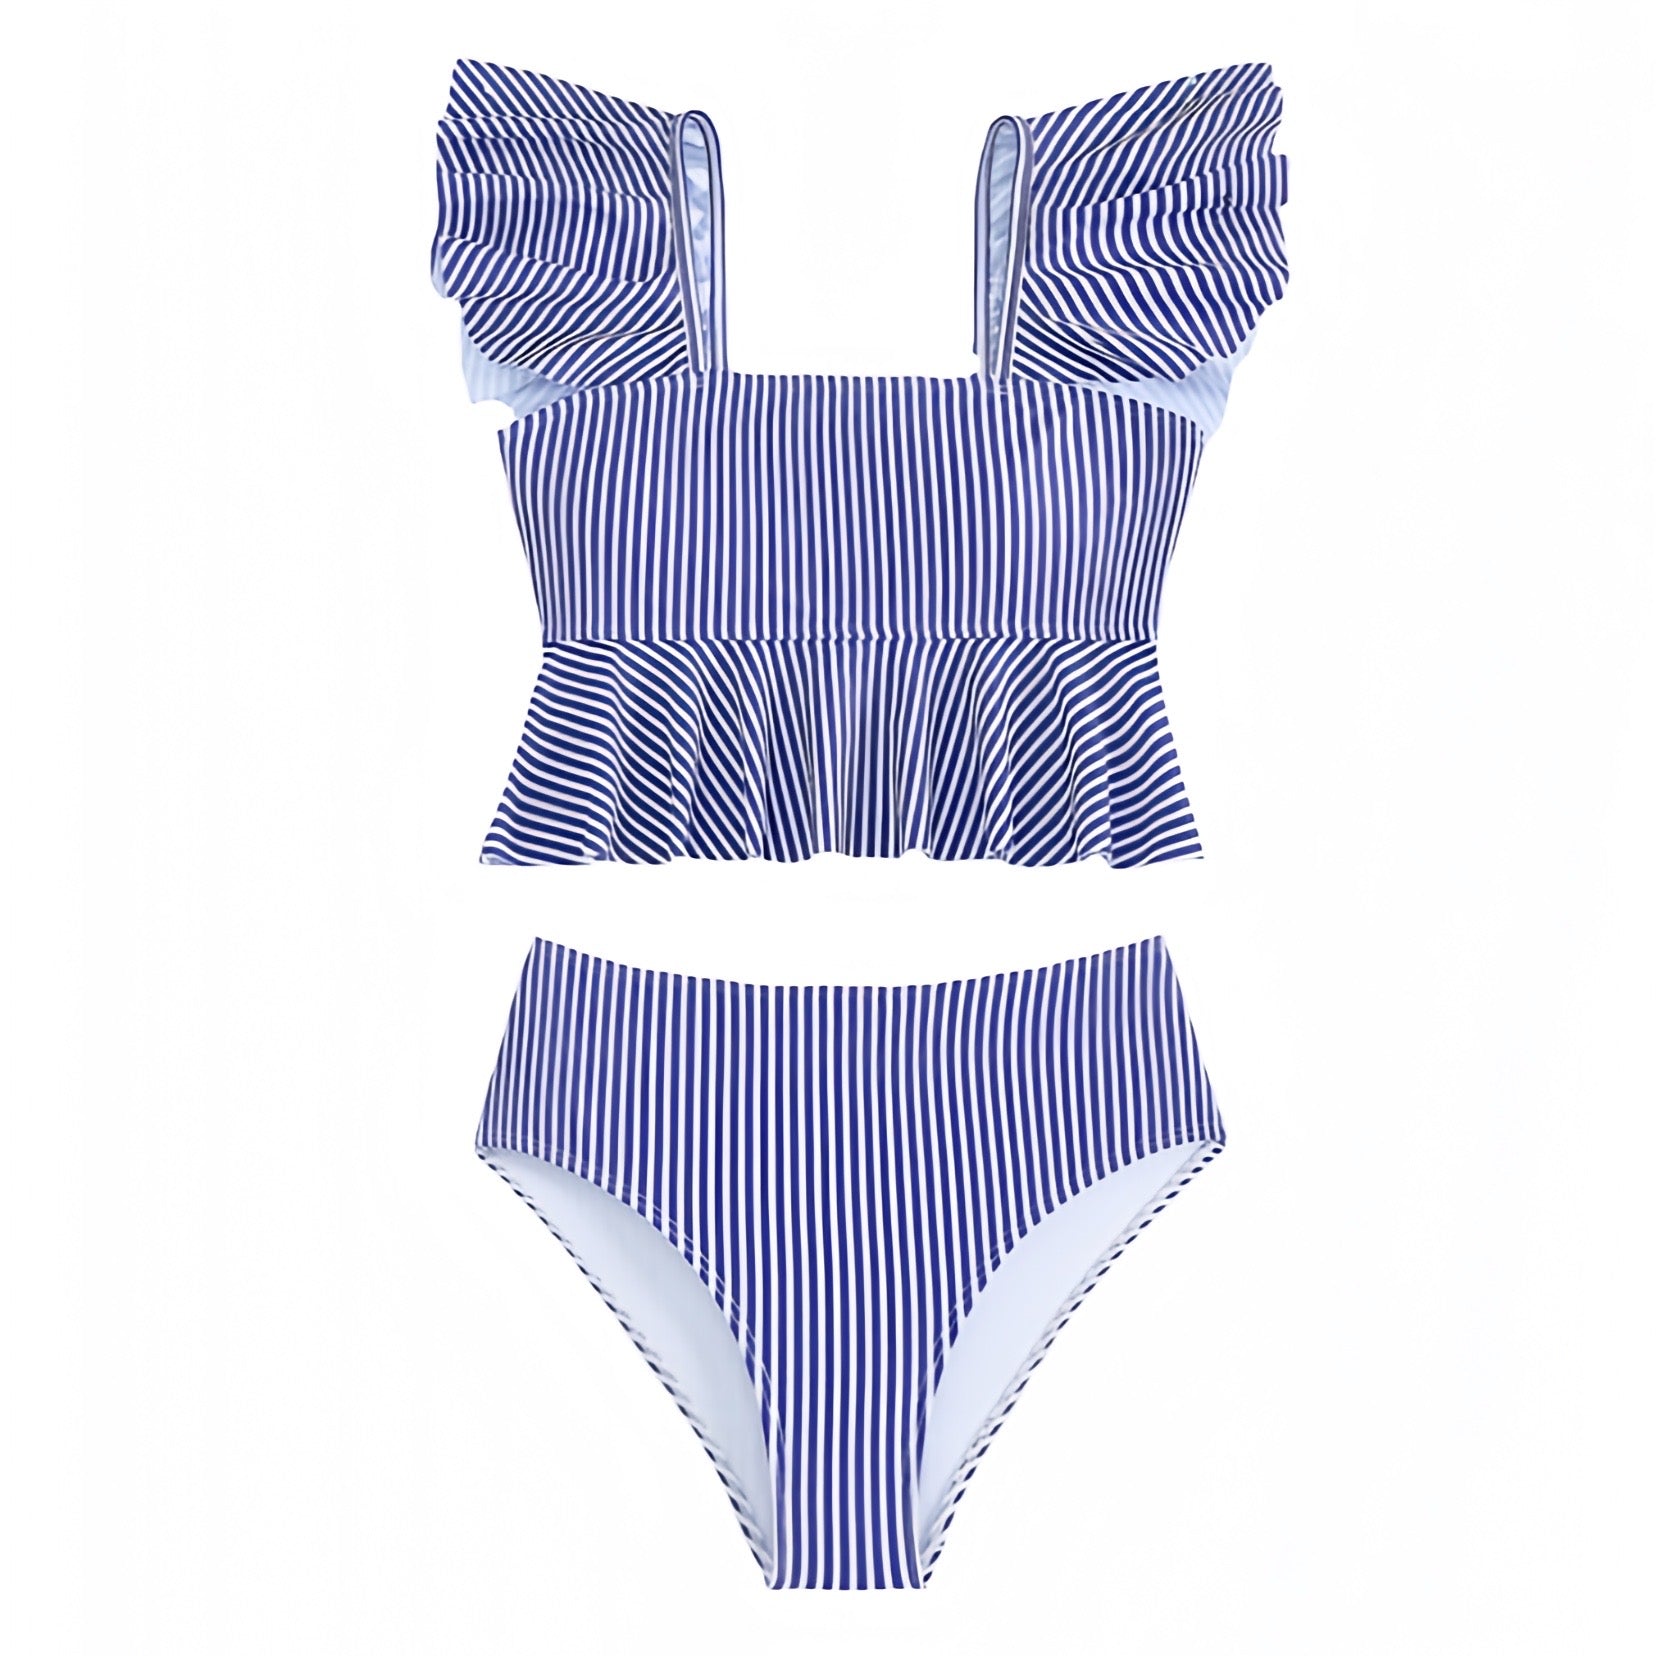 dark-navy-blue-and-white-striped-seersucker-print-patterned-layered-ruffle-trim-spaghetti-strap-short-puff-sleeve-bandeau-push-up-wireless-bikini-set-two-piece-swimsuit-swimwear-top-bottoms-bathing-suit-thong-cheecky-spring-2024-summer-chic-trendy-women-ladies-elegant-classy-preppy-style-coastal-granddaughter-beach-wear-european-vacation-revolve-hill-house-minow-fillyboo-serena-lily